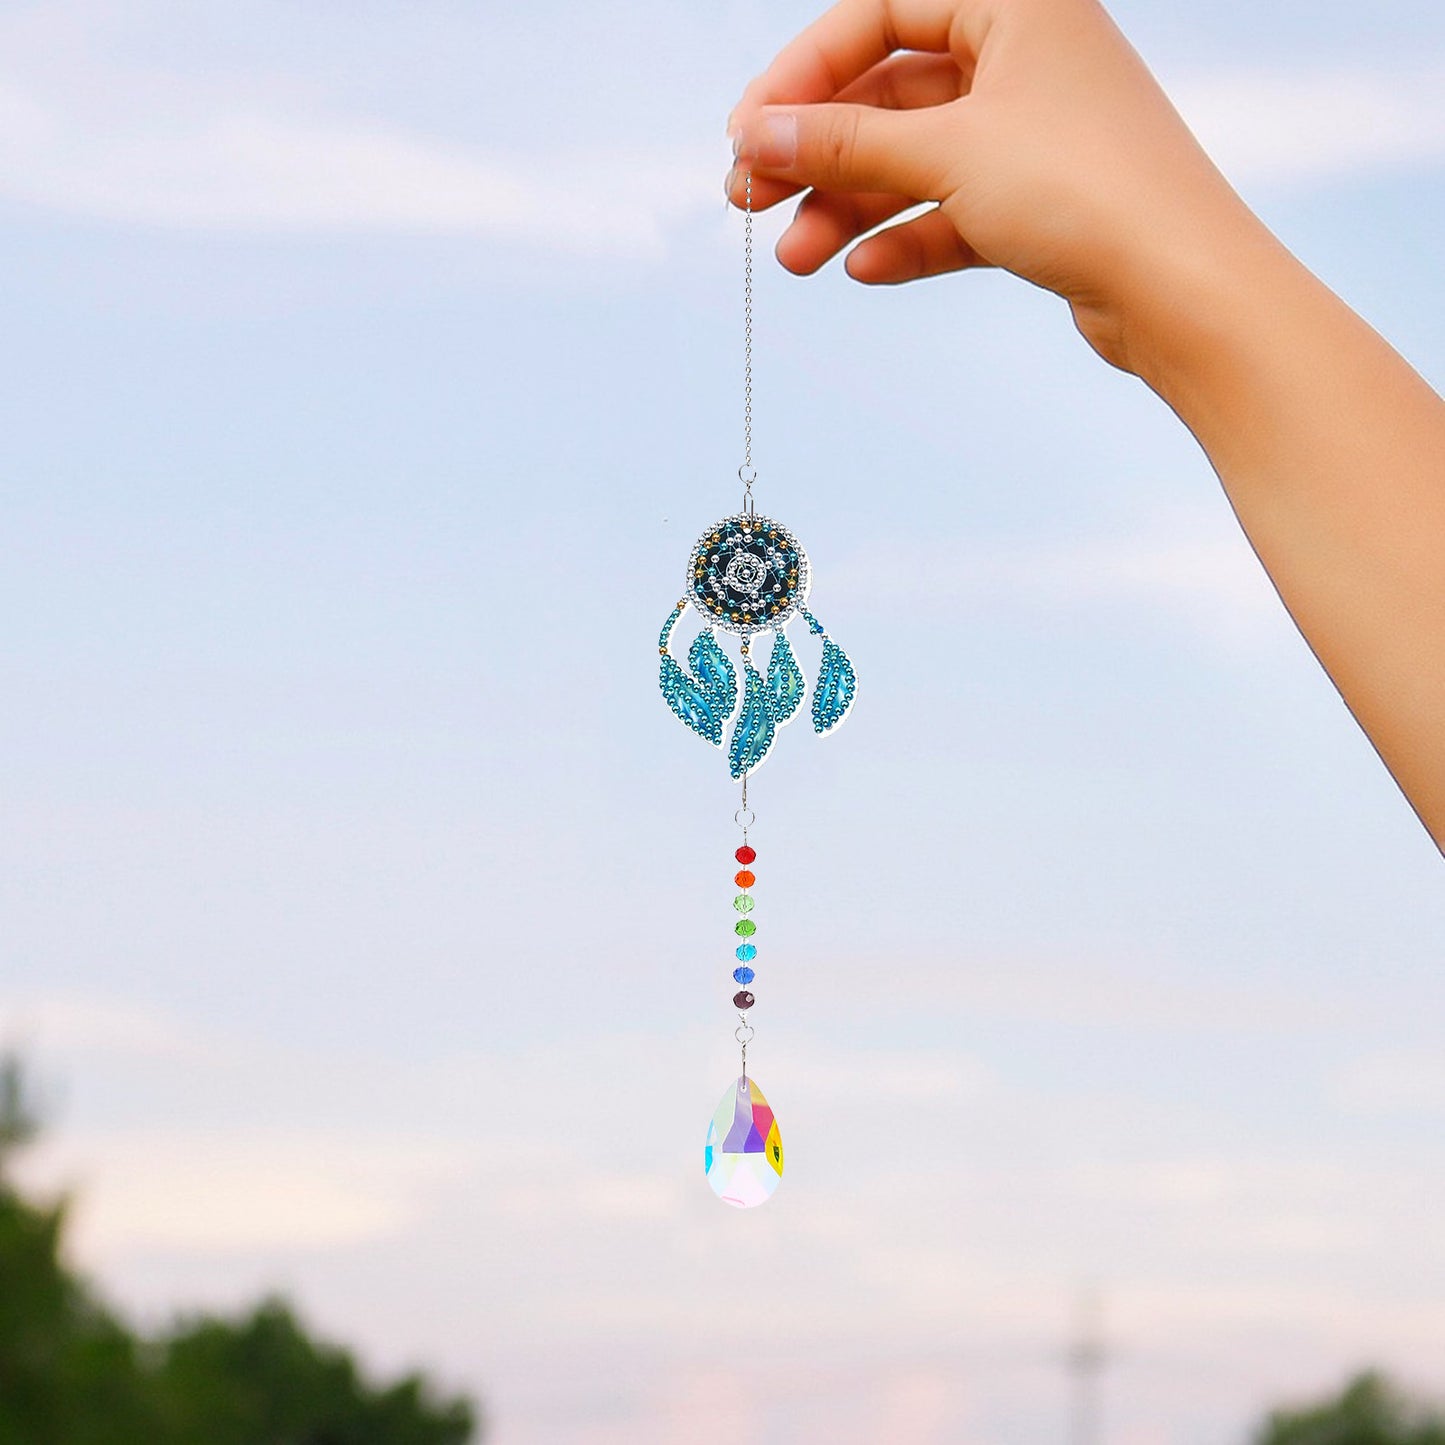 5D Diamond Painting Crystal Gnome Wind Chime Kit Hanging Pendant